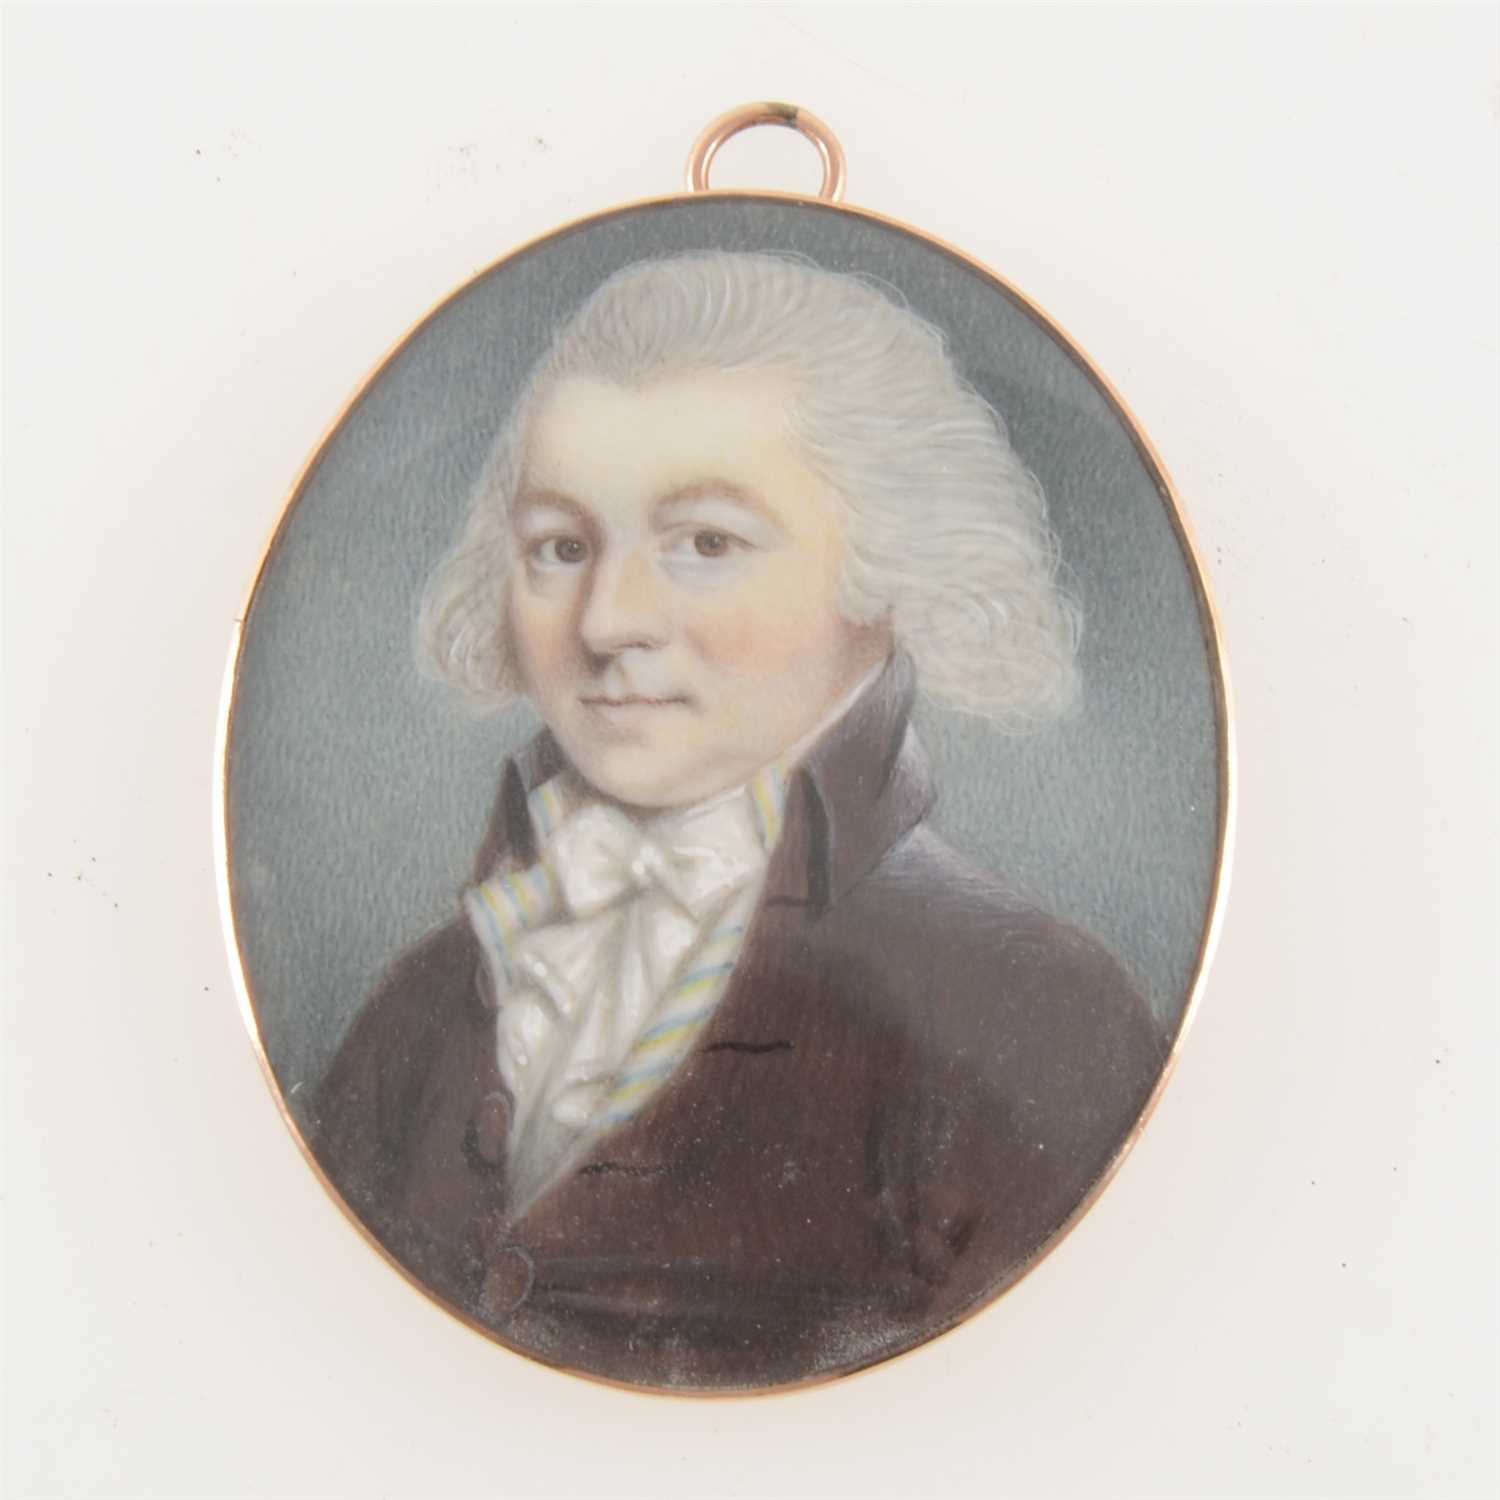 Lot 217 - English School, 19th Century, miniature portrait of a gentleman, head and shoulders, with a dark jacket and bow tie, unsigned, oval, 53mm x 43mm, yellow metal frame.